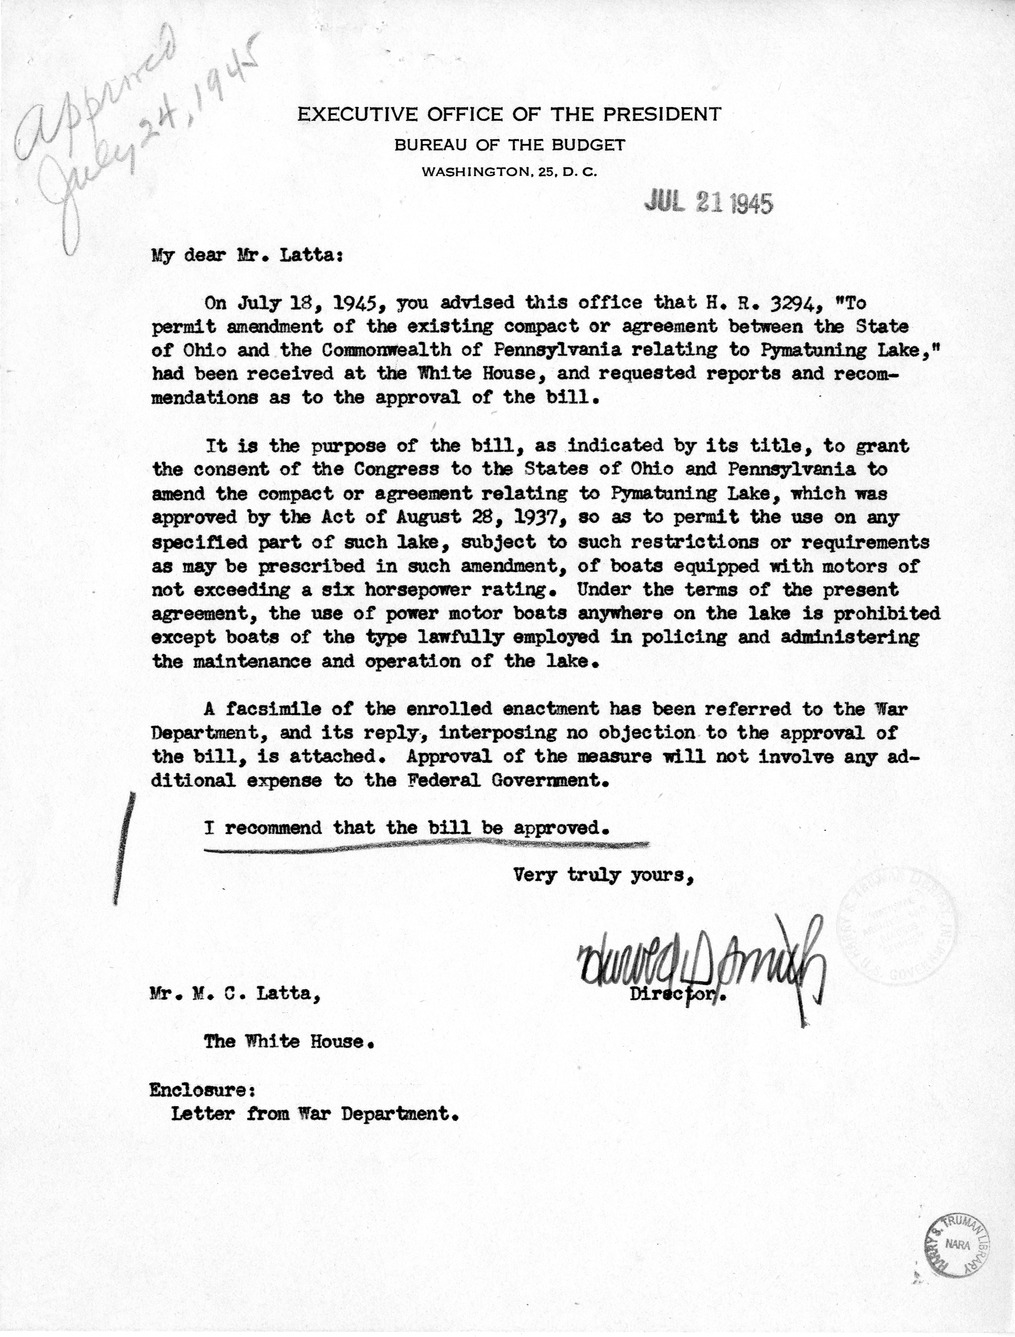 Memorandum from Harold D. Smith to M. C. Latta, H.R. 3294, To Permit Amendment of the Existing Compact or Agreement Between the State of Ohio and the Commonwealth of Pennsylvania Relating to Pymatuning Lake, with Attachments